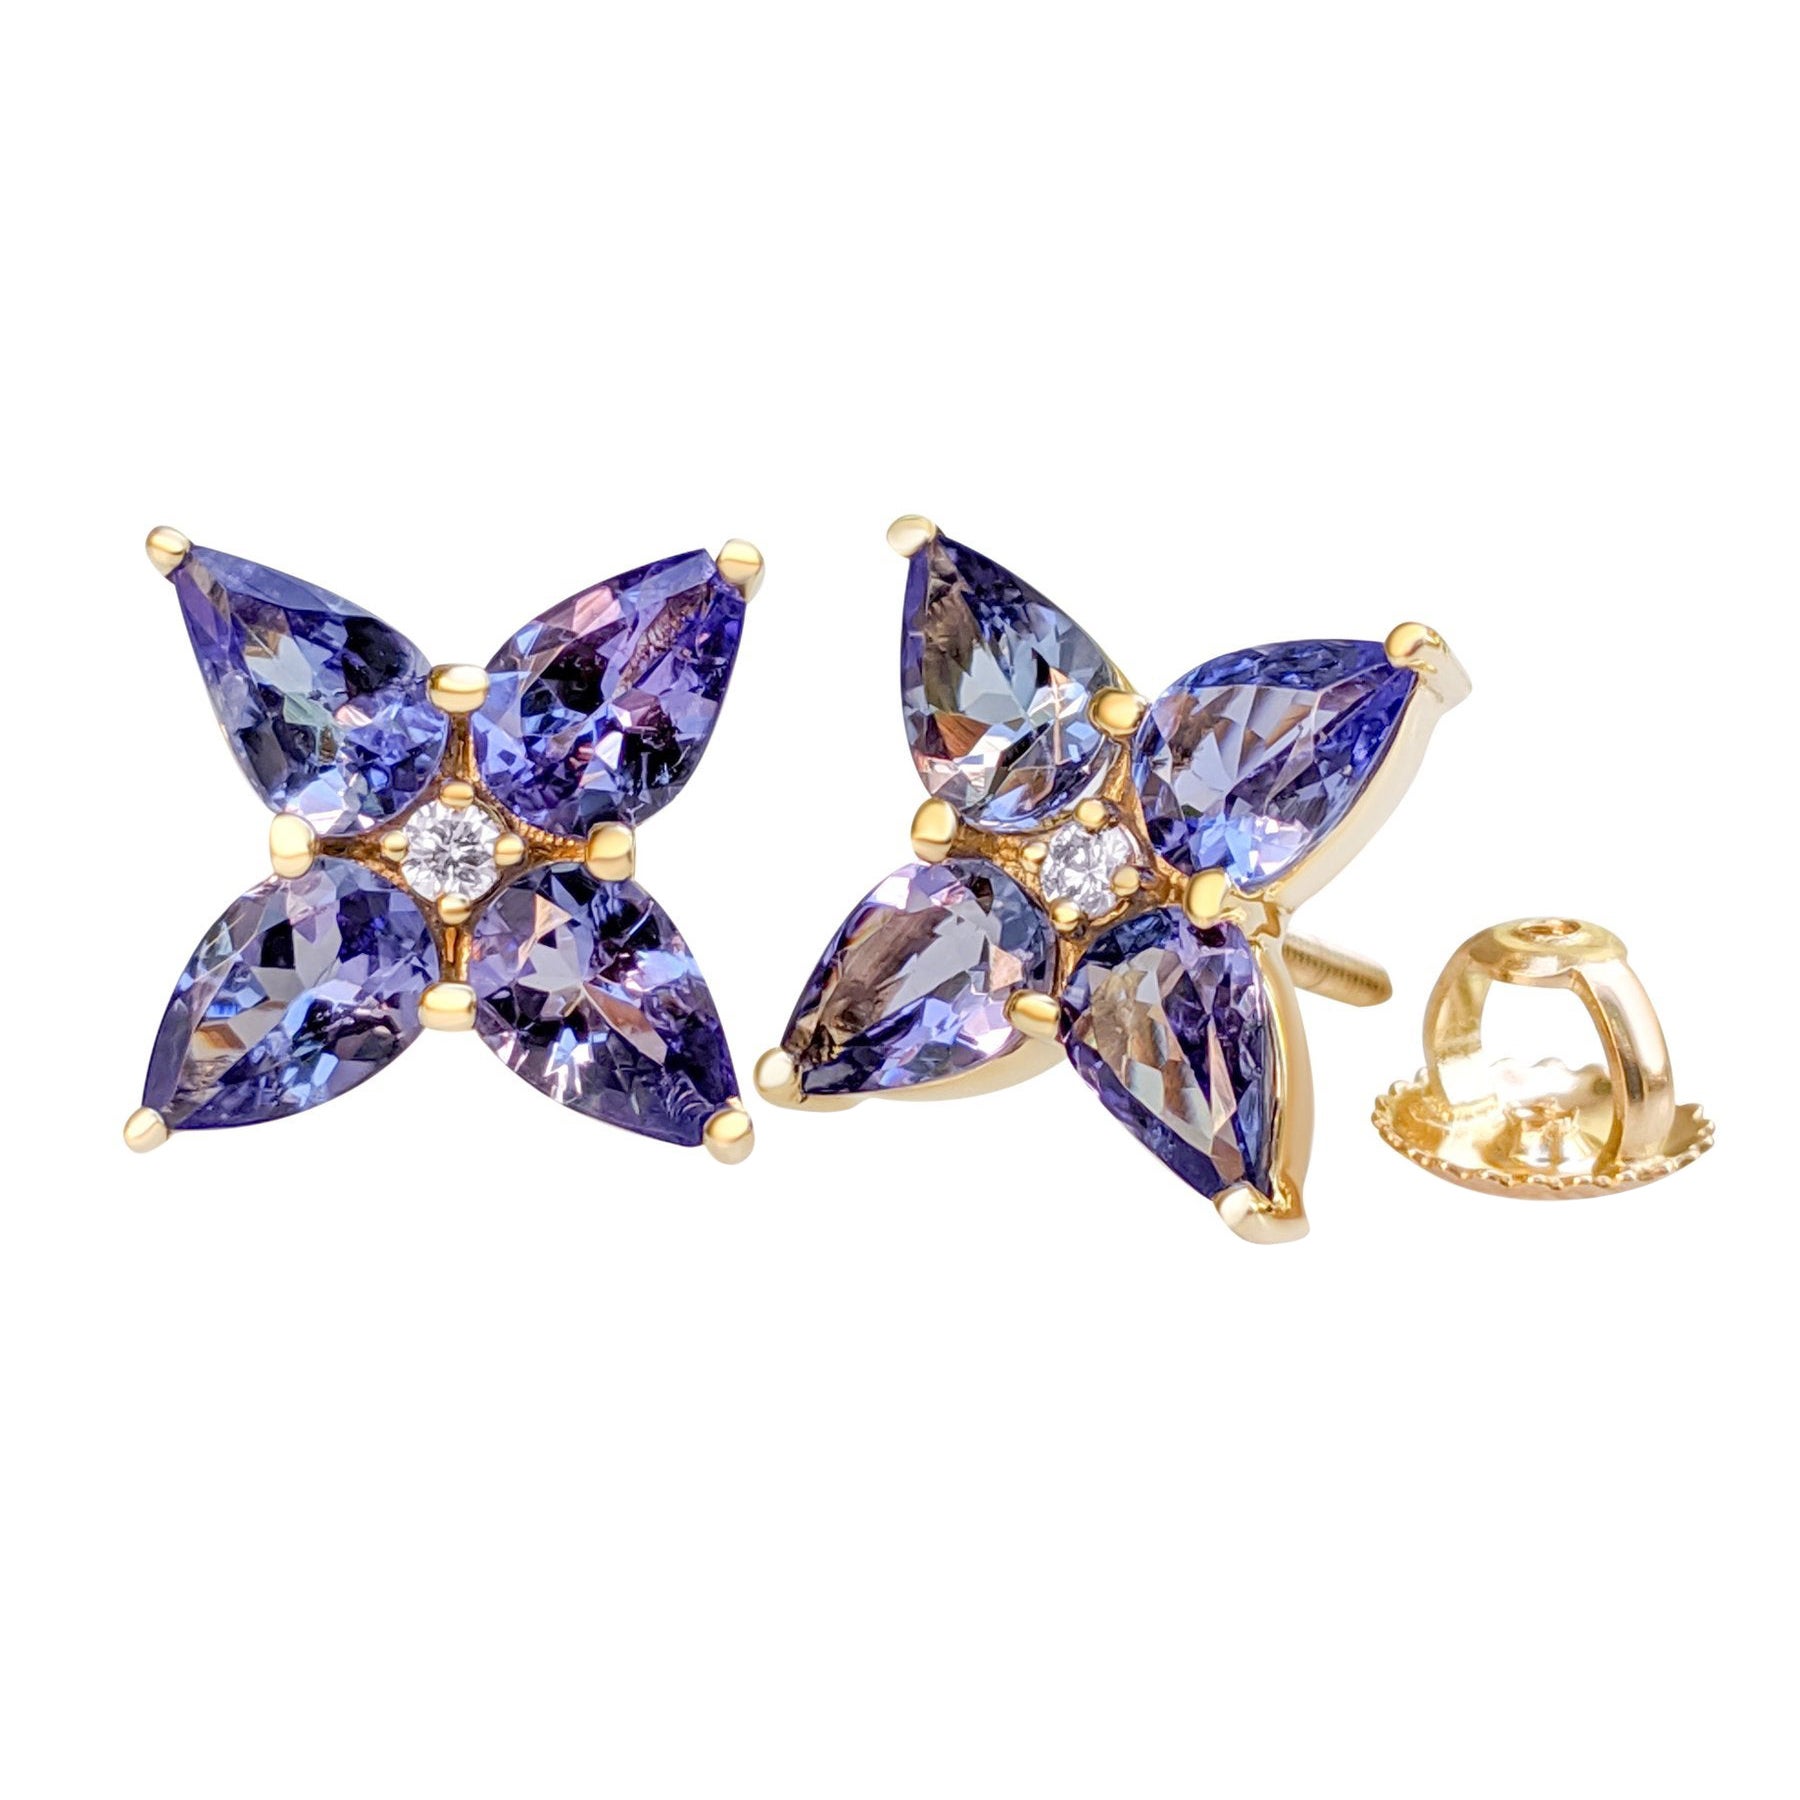 NO RESERVE! 3.00Ct Tanzanite and 0.05Ct Diamonds 14 kt. Yellow gold Earrings